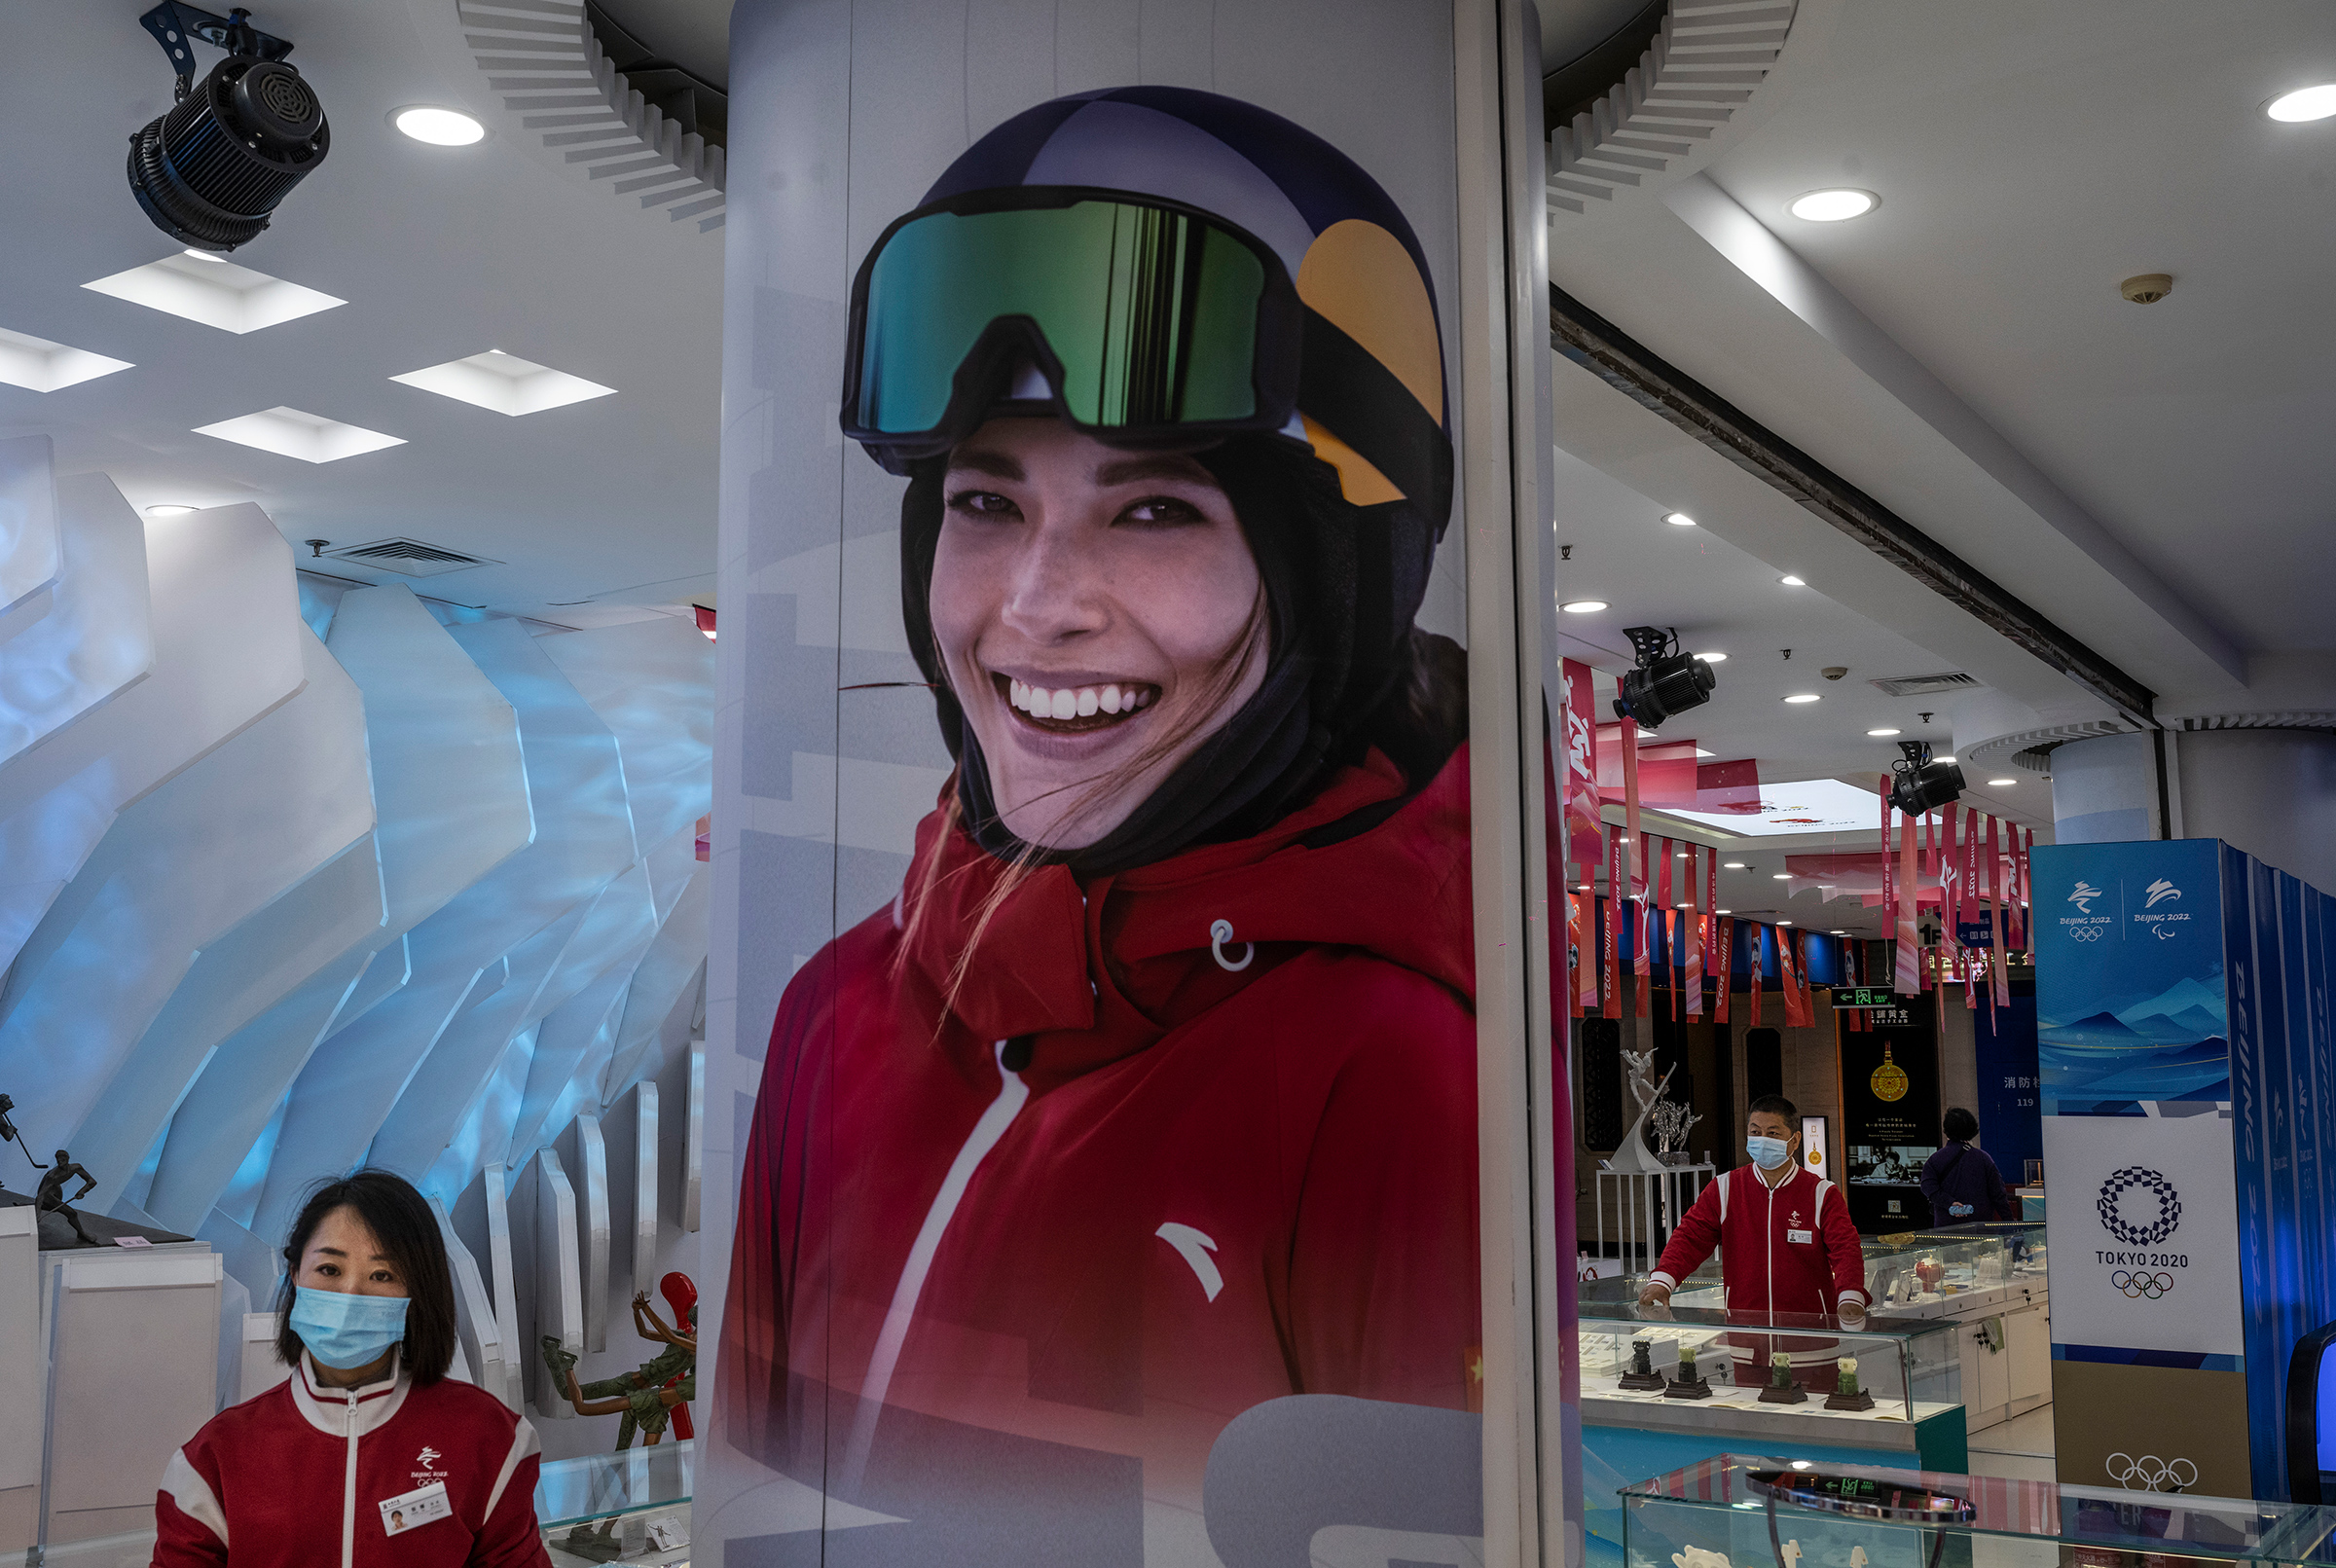 China’s “Snow Princess” beams from a poster at an Olympics merchandise store in Beijing (Kevin Frayer—Getty Images)